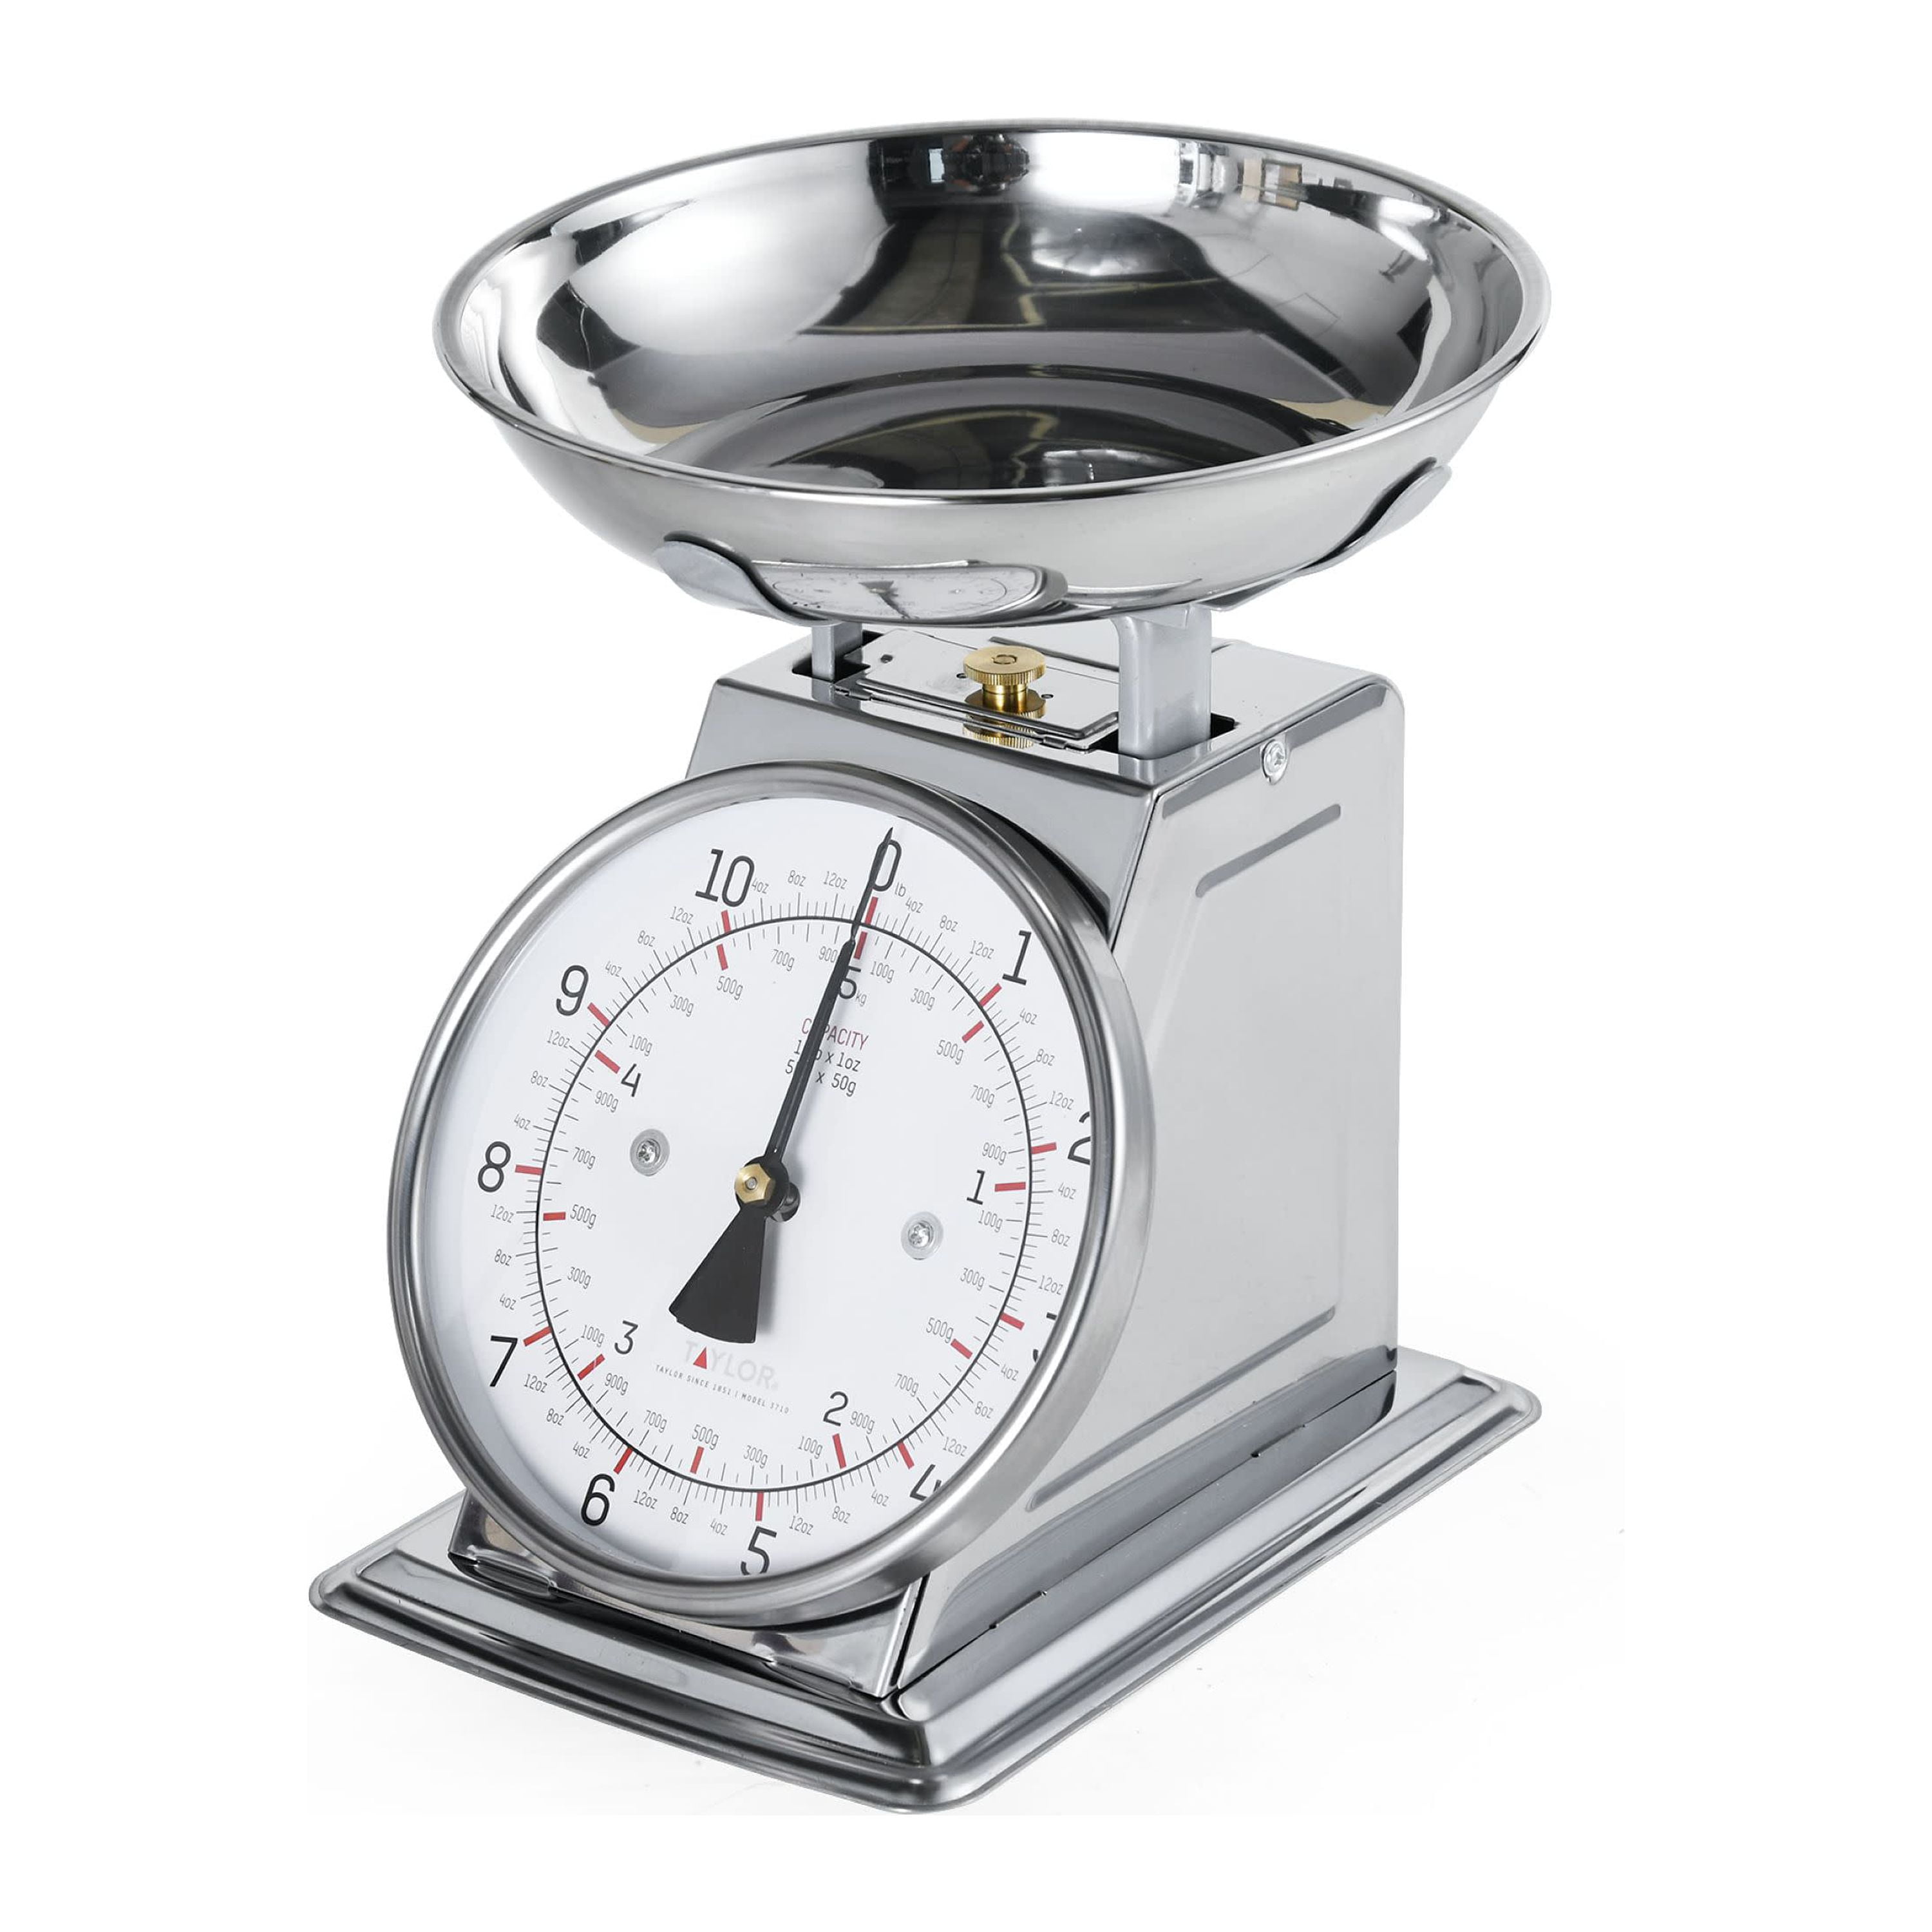 Taylor Mechanical/Analog Kitchen Scale and Food Scale in White, Max 11 Lbs.